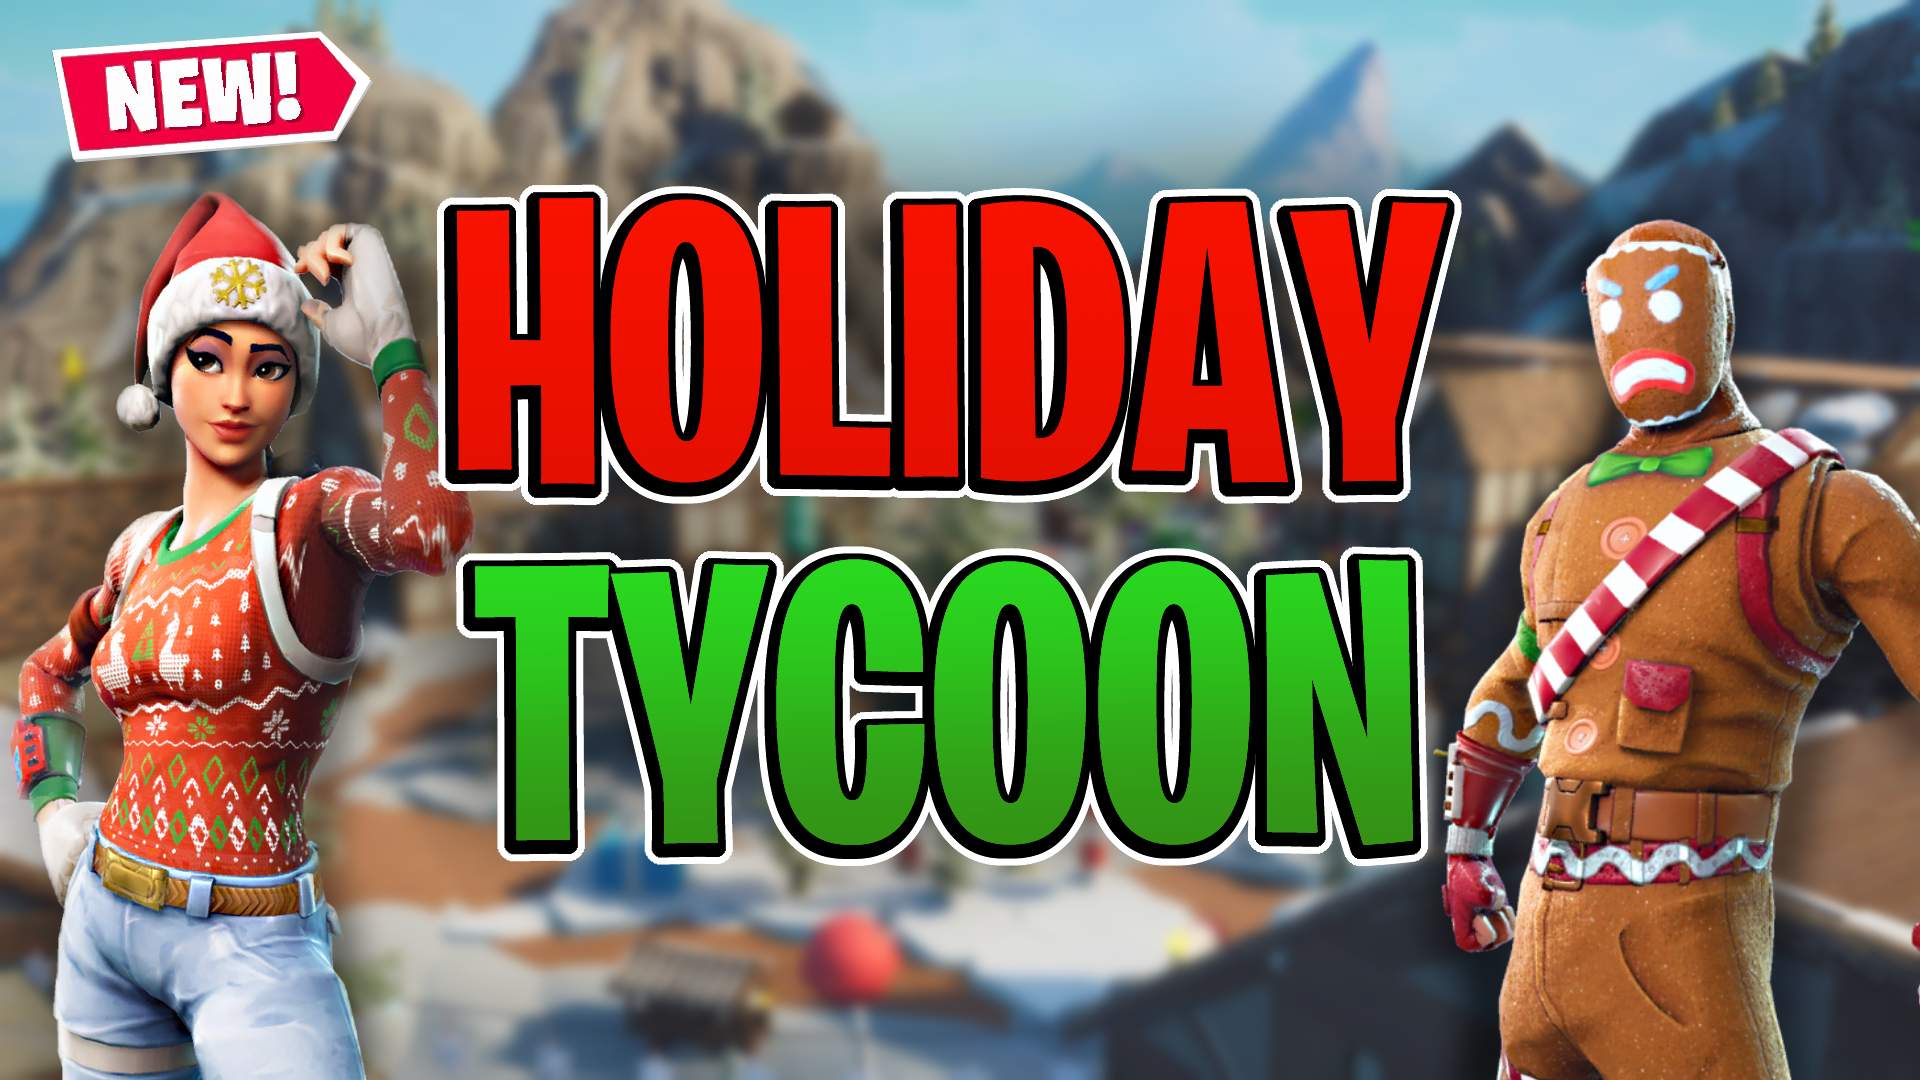 HOLIDAY TYCOON